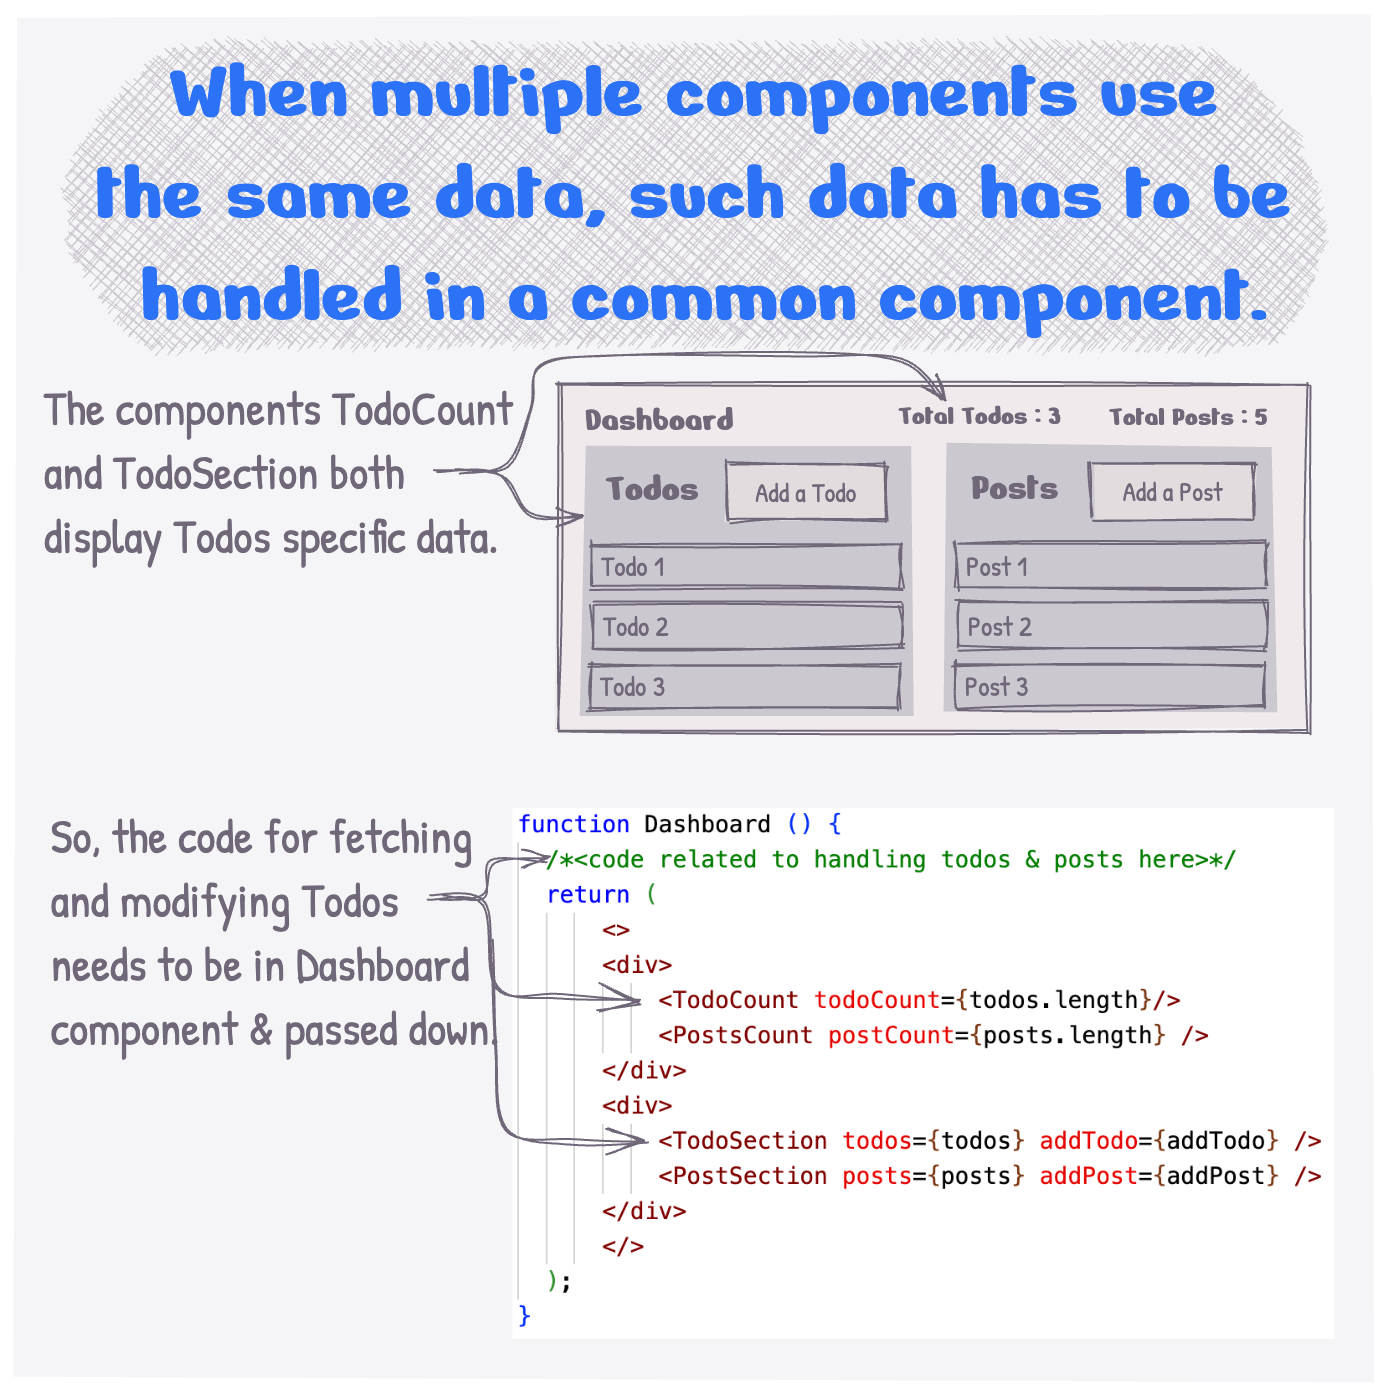 When multiple components use the same data, such data has to be handled in a common component.